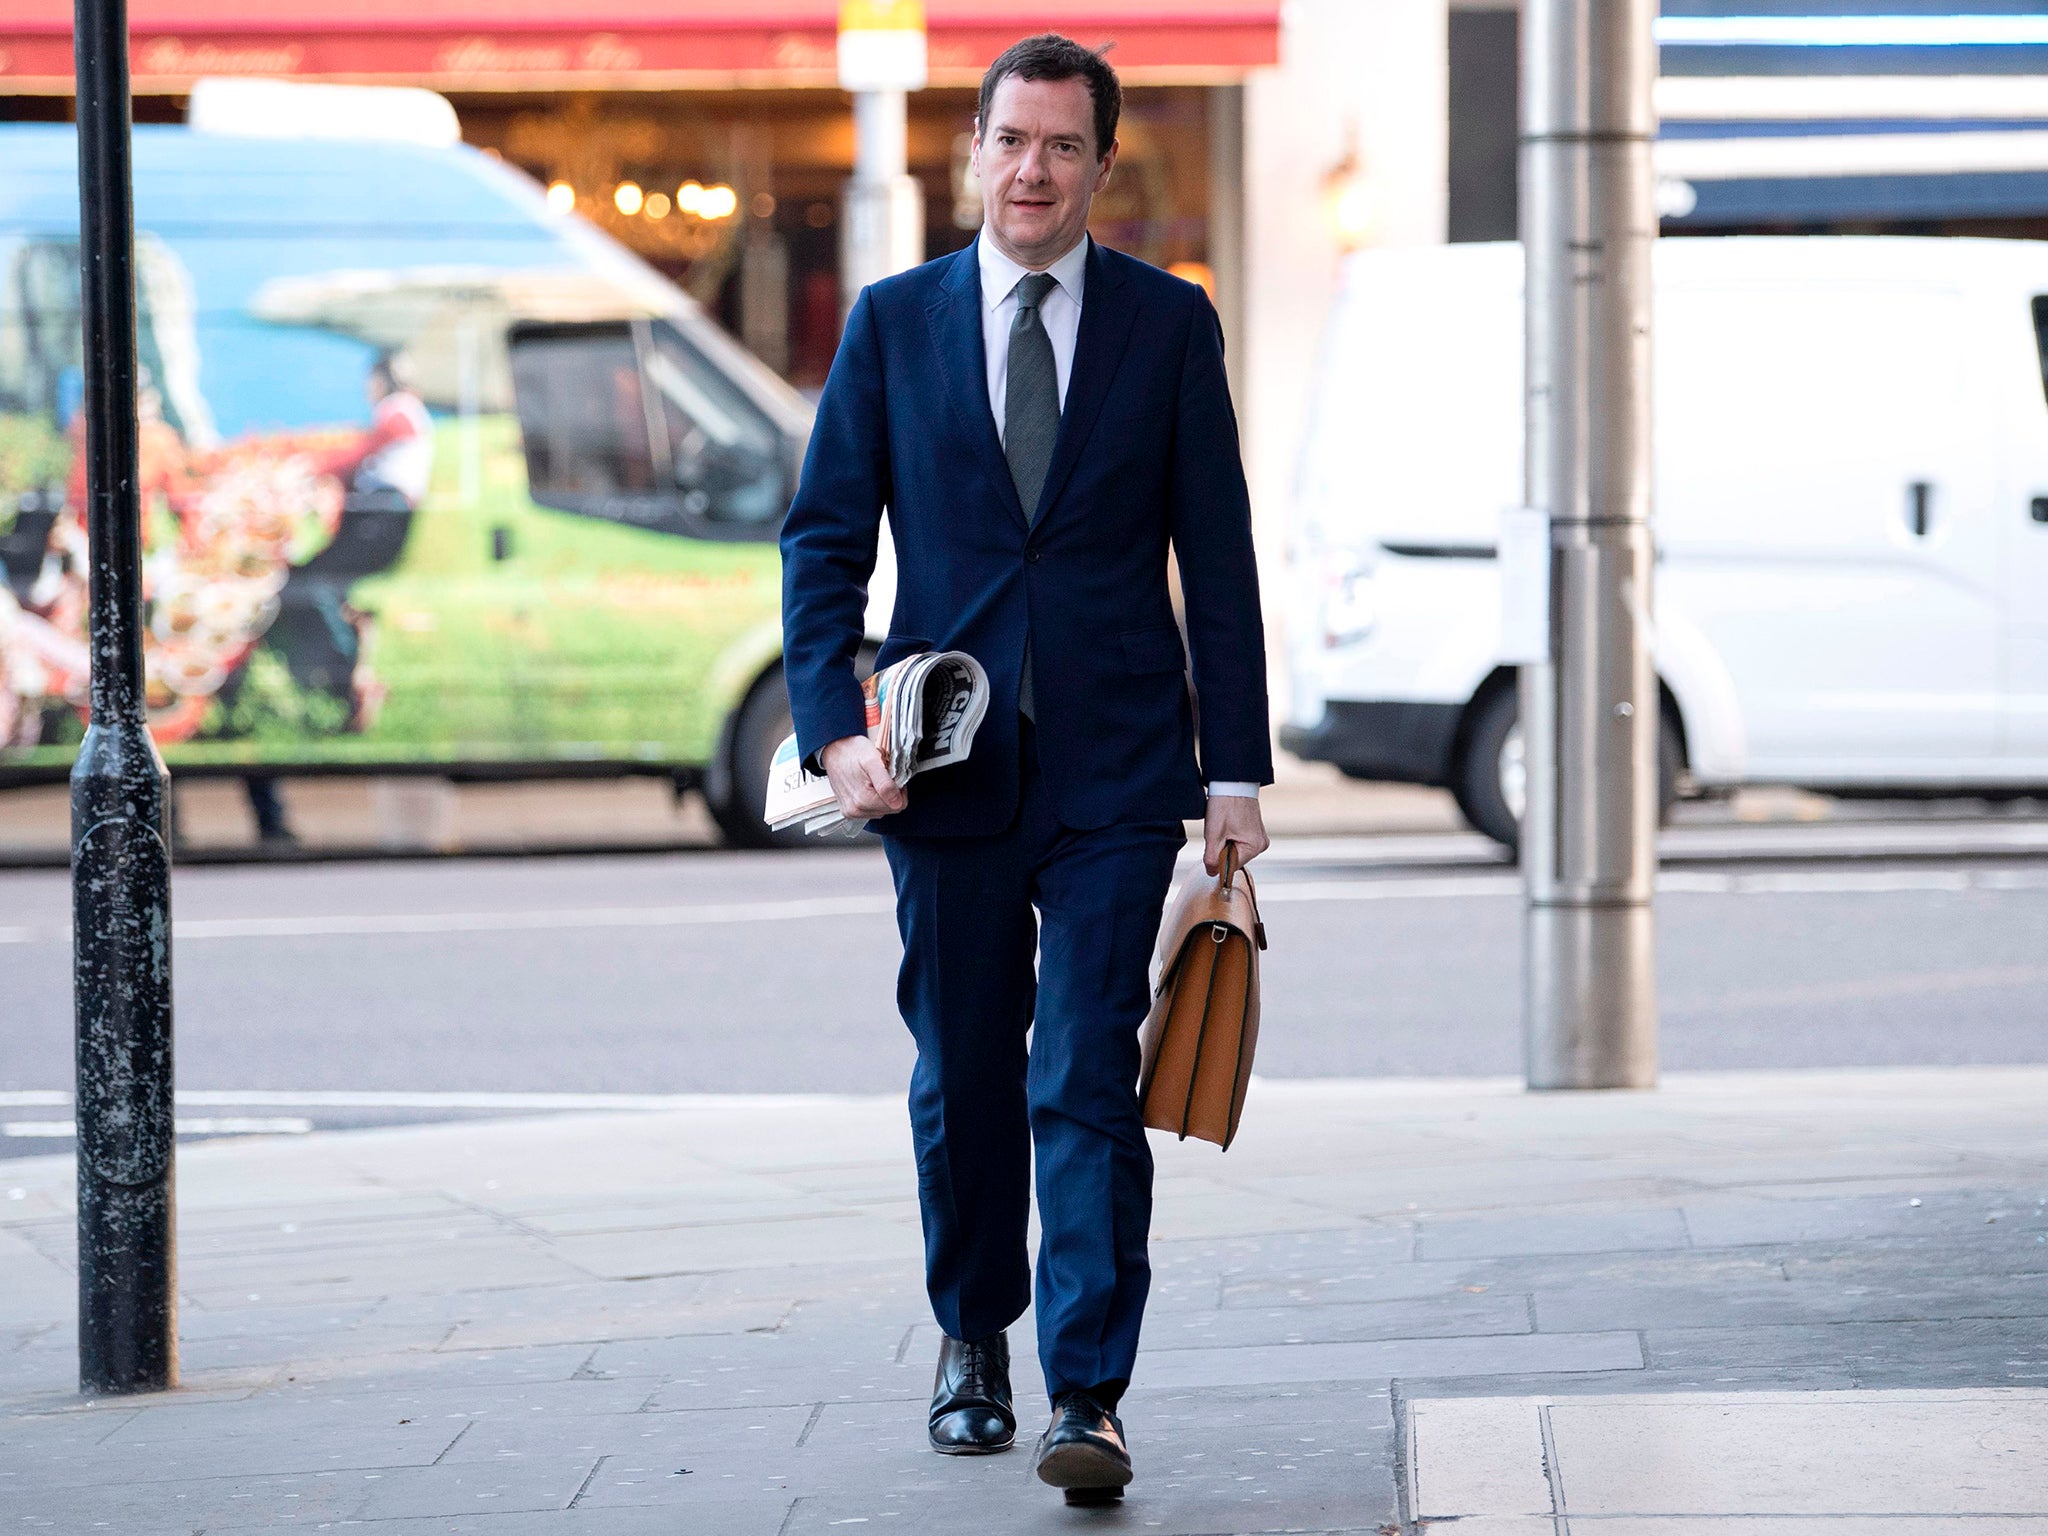 &#13;
Former Chancellor George Osborne arrives on his first day at work as editor of the London Evening Standard newspaper in London last month &#13;